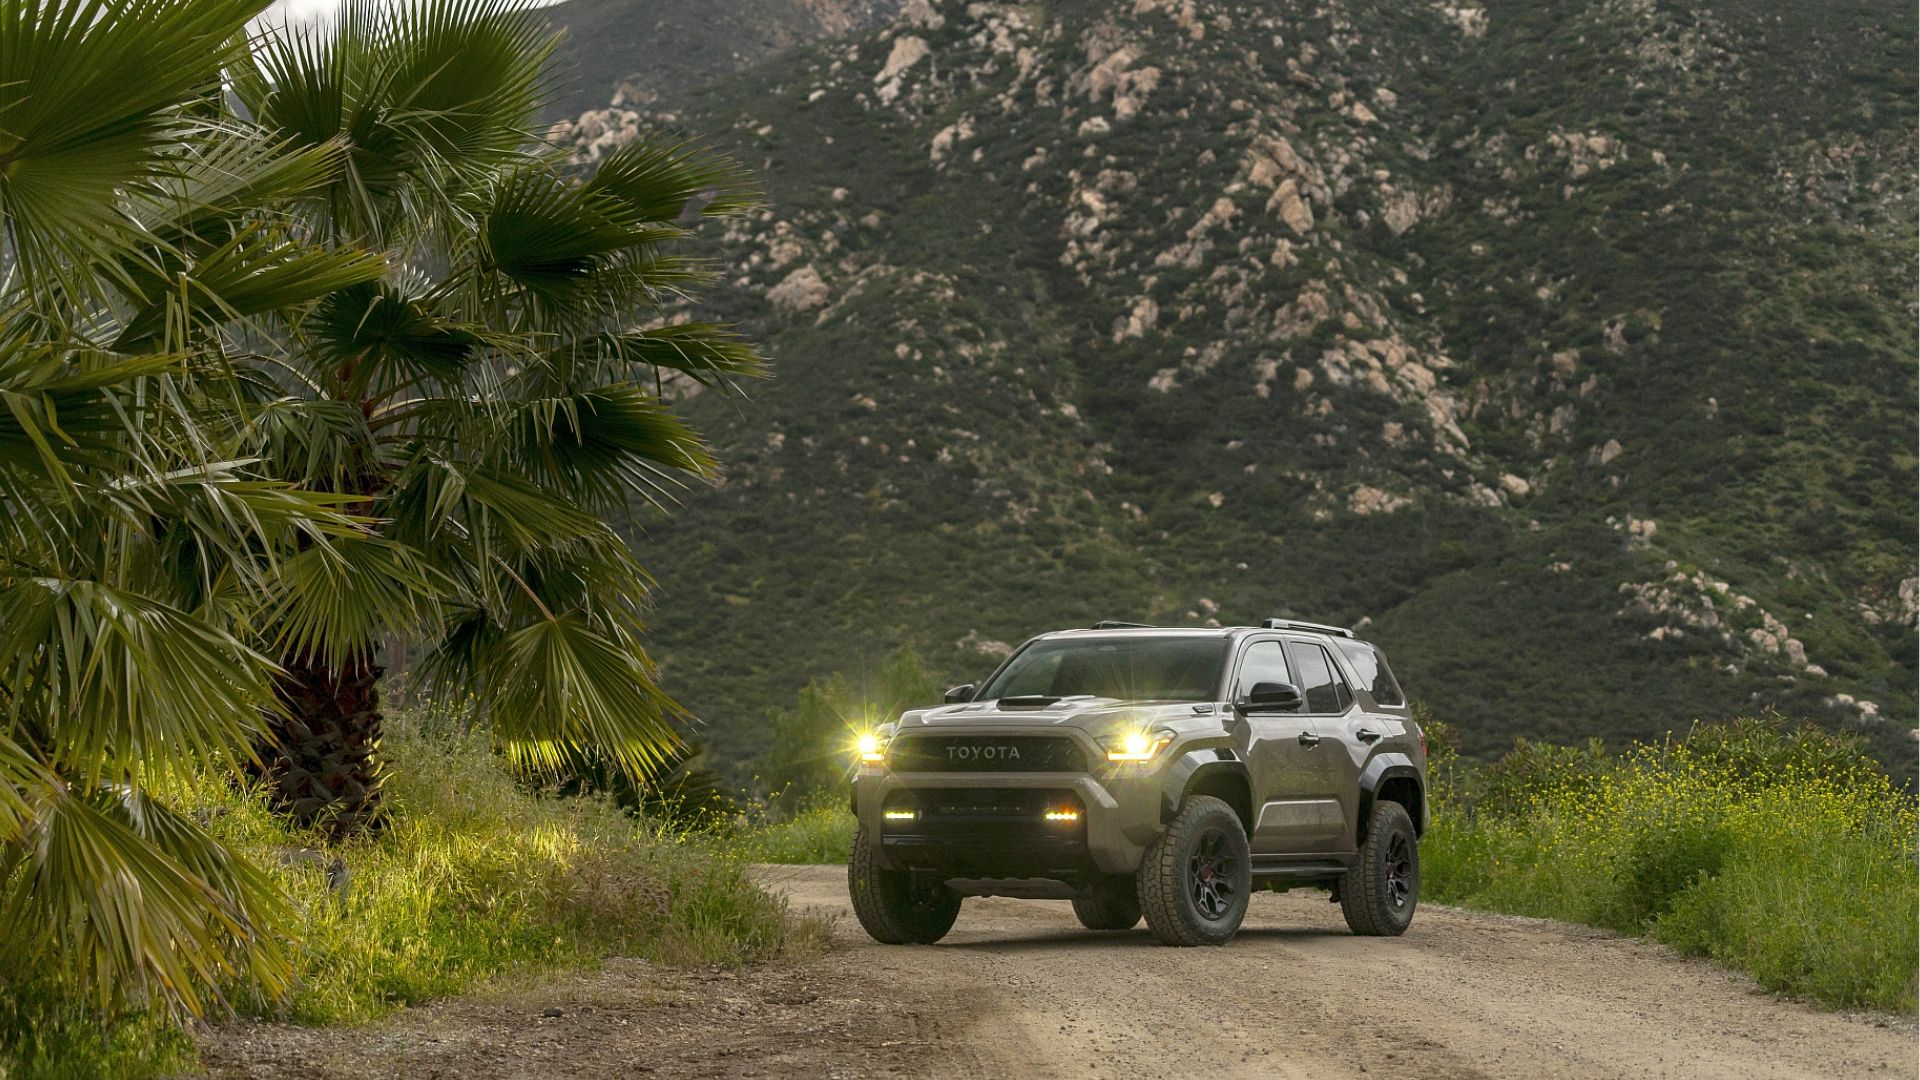 2025 Toyota 4Runner front angle view in mountain scene with headlights on